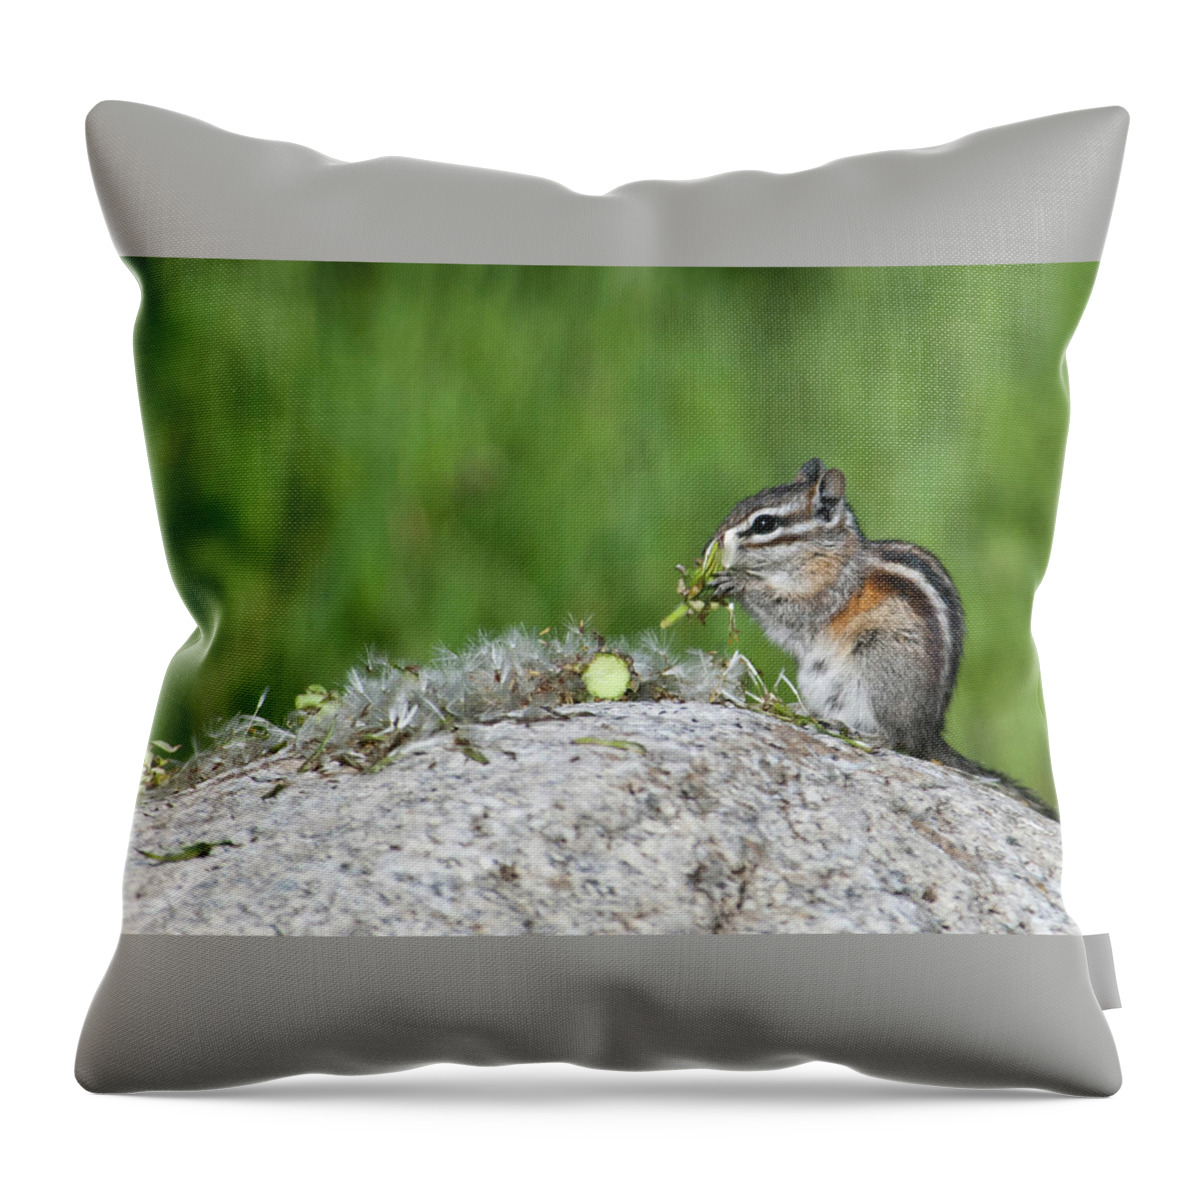 Chipmunk Throw Pillow featuring the photograph Chipmunk Eating Seeds by Cascade Colors